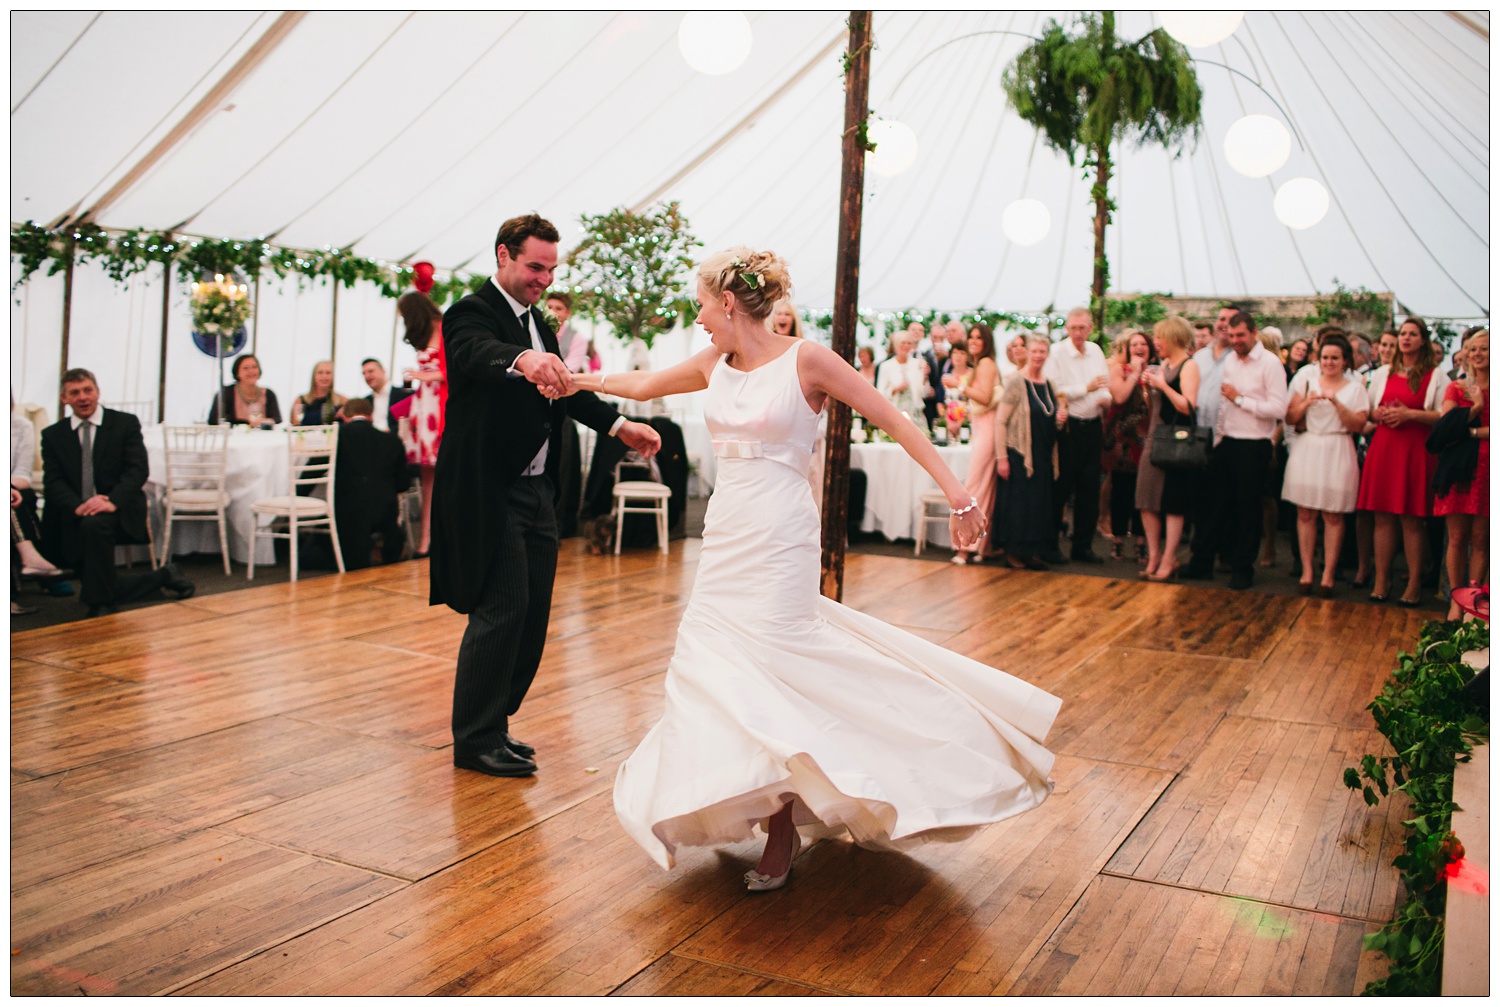 First dance in a marquee decorated with fairy lights and green foliage. The bride is twirling round.